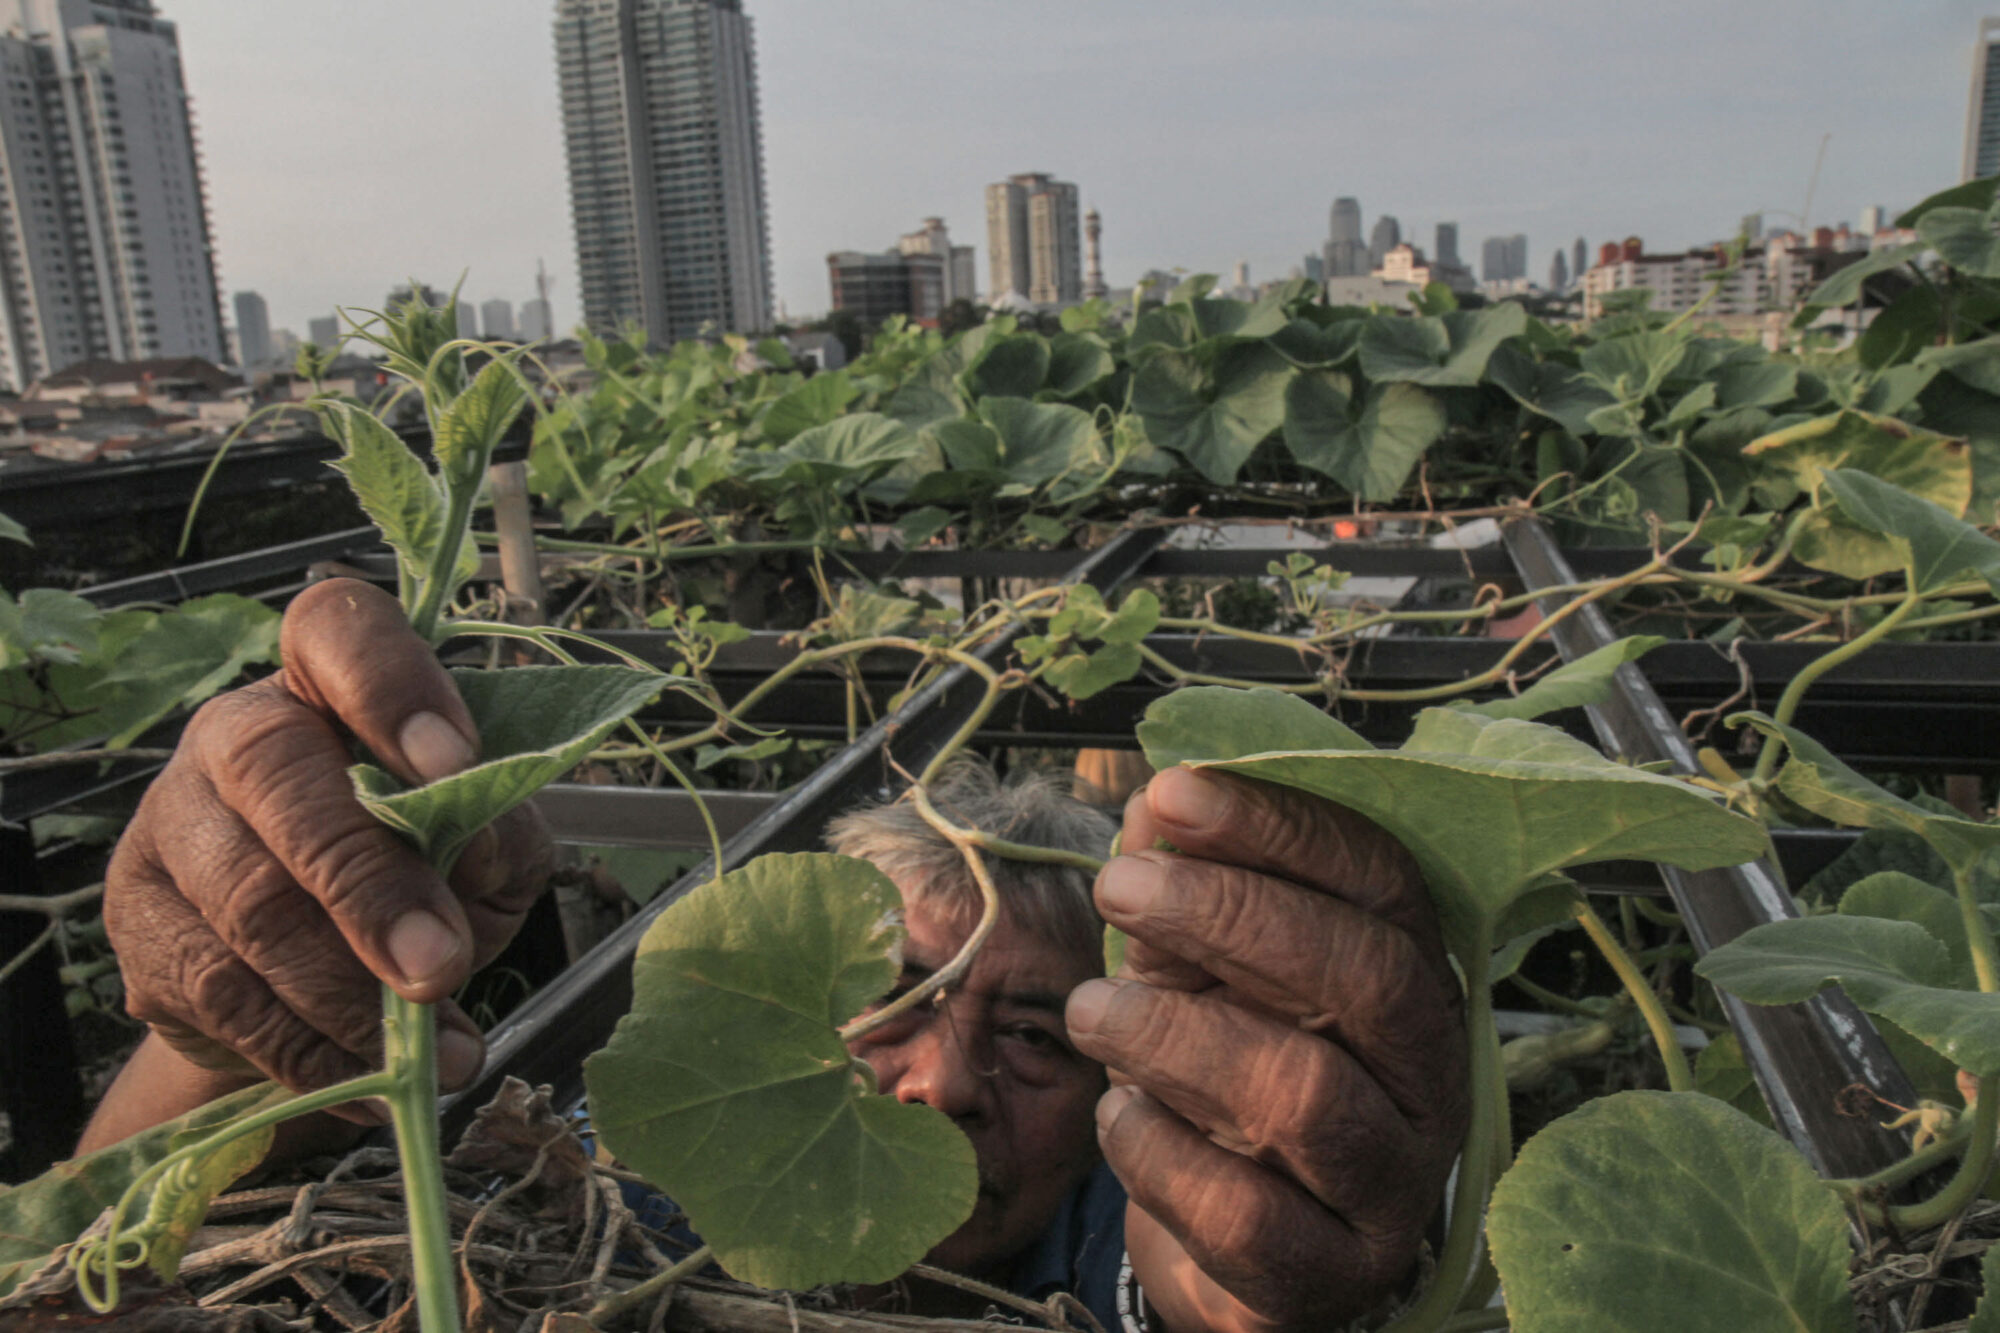 Person tending to their vegetable garden, with a city skyline in the background.